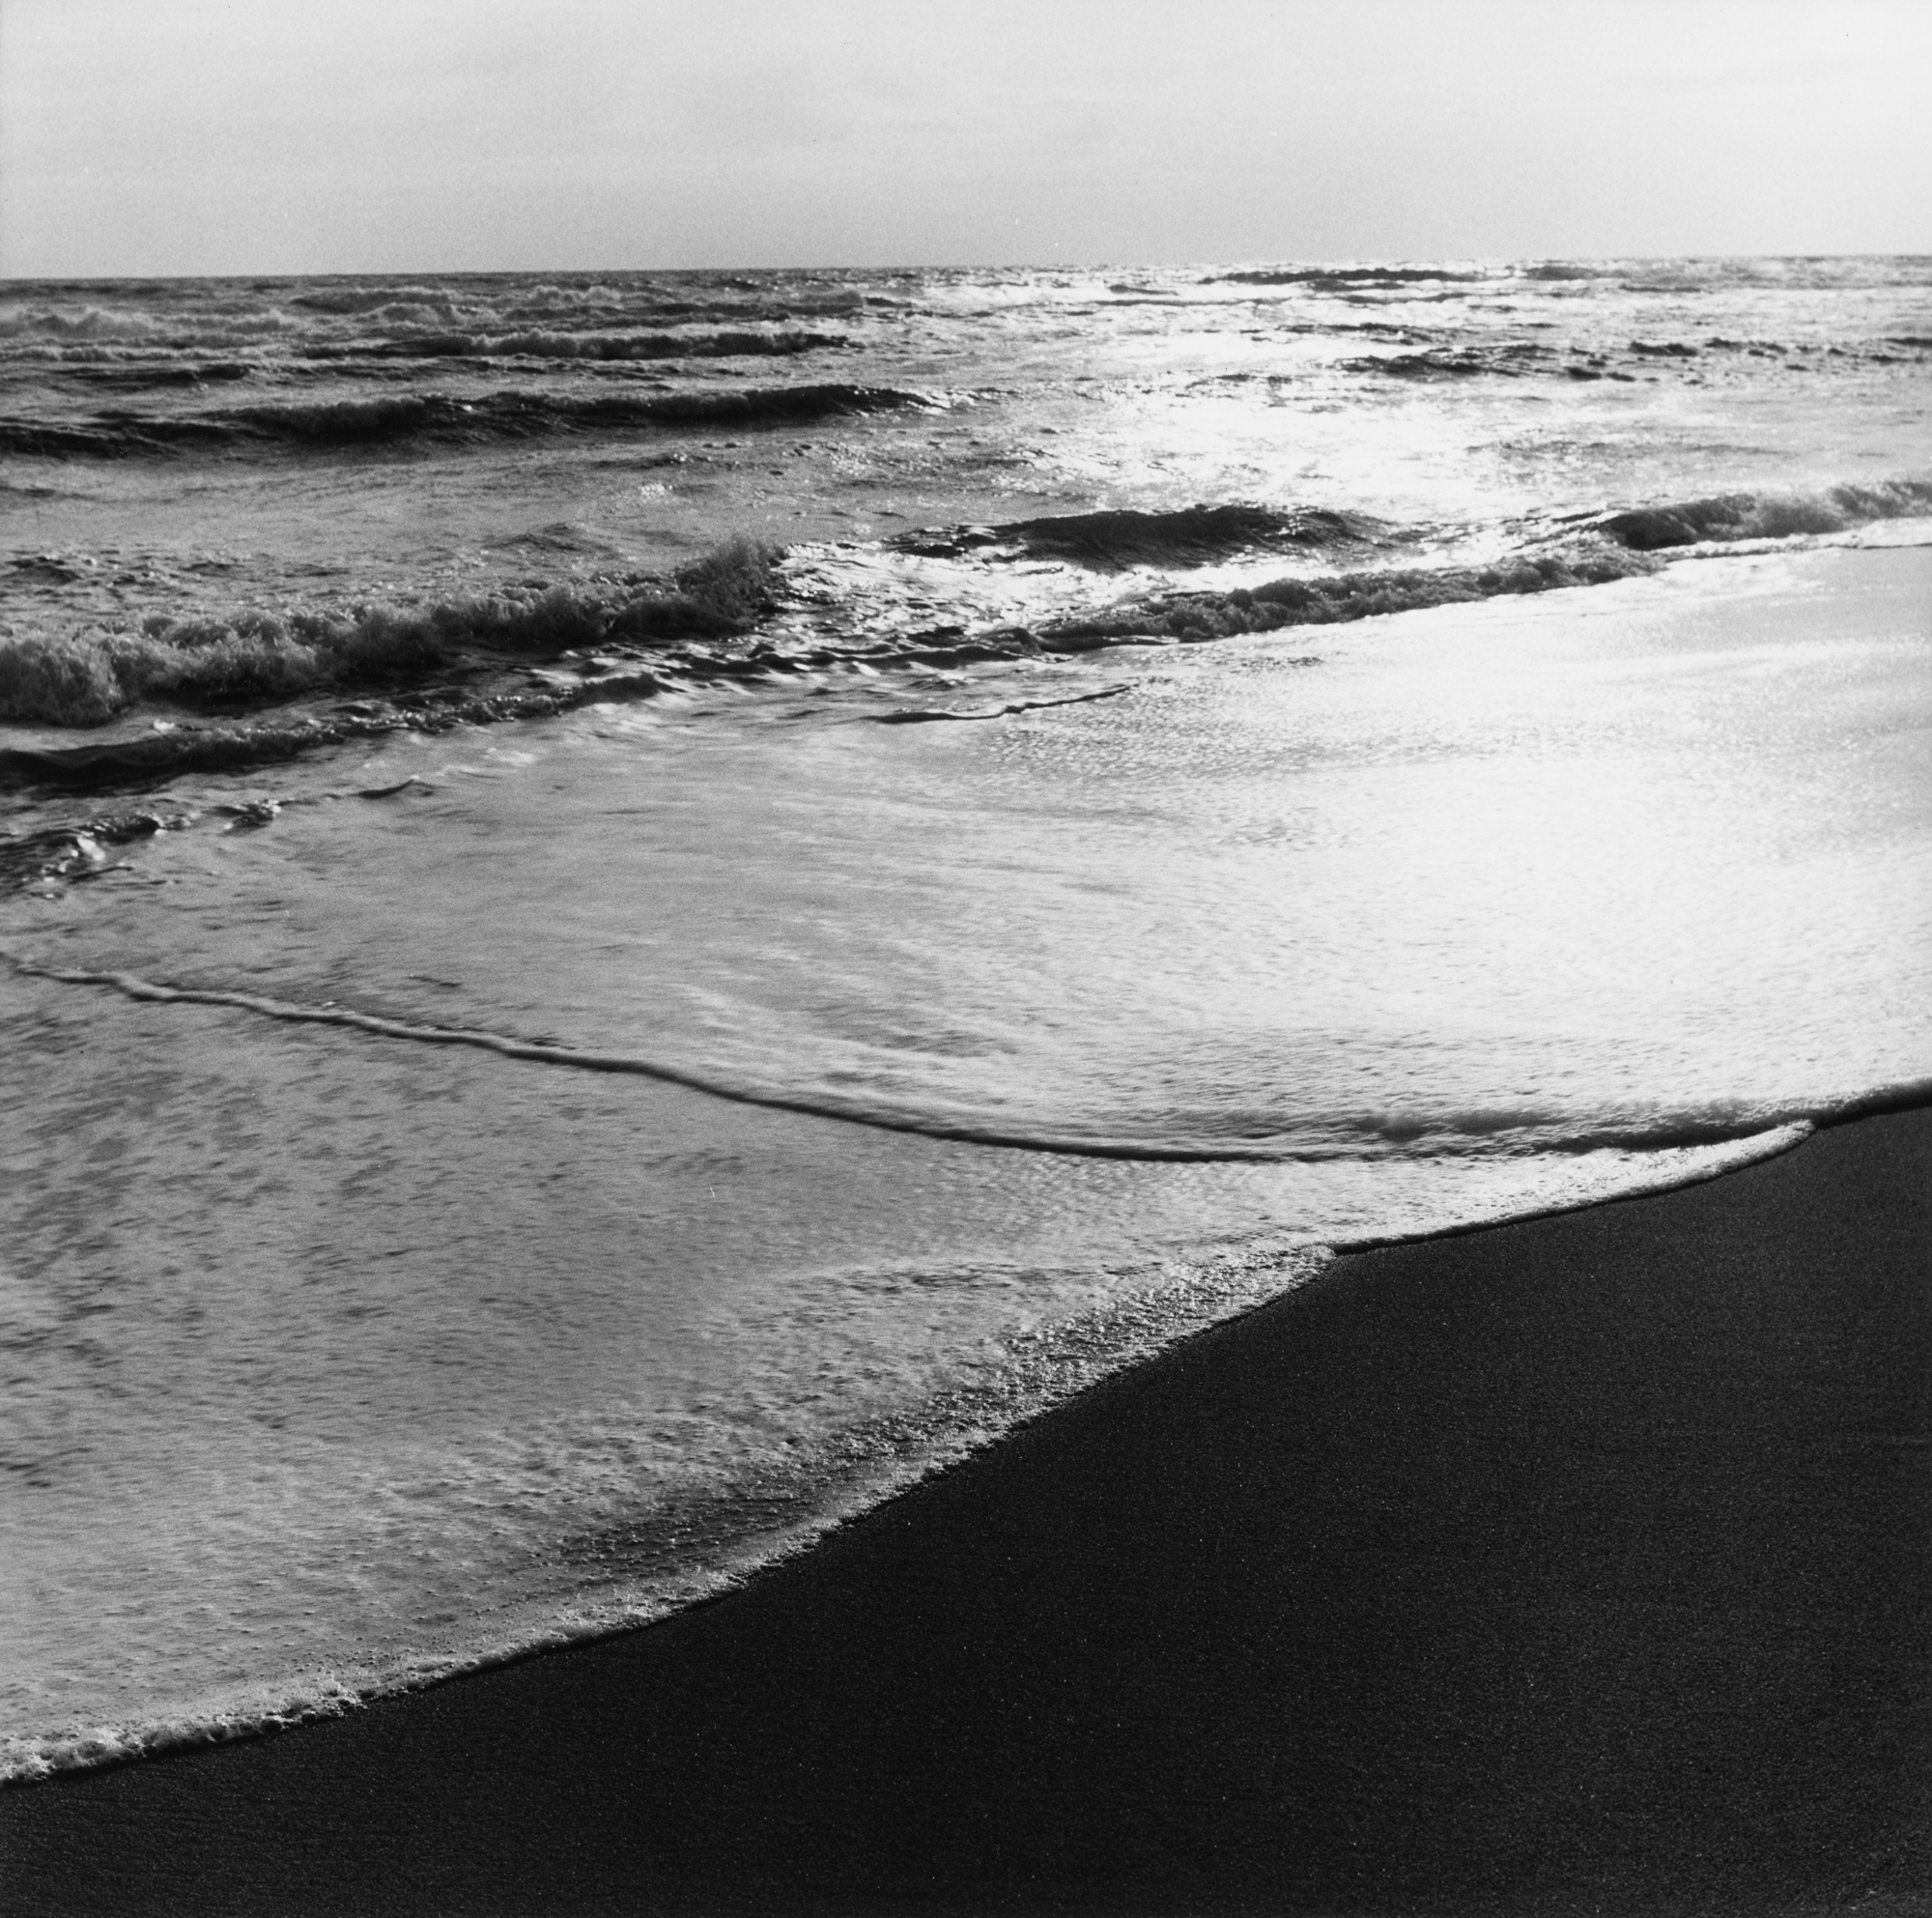 Black and white photograph of ocean waves crashing onto the beach